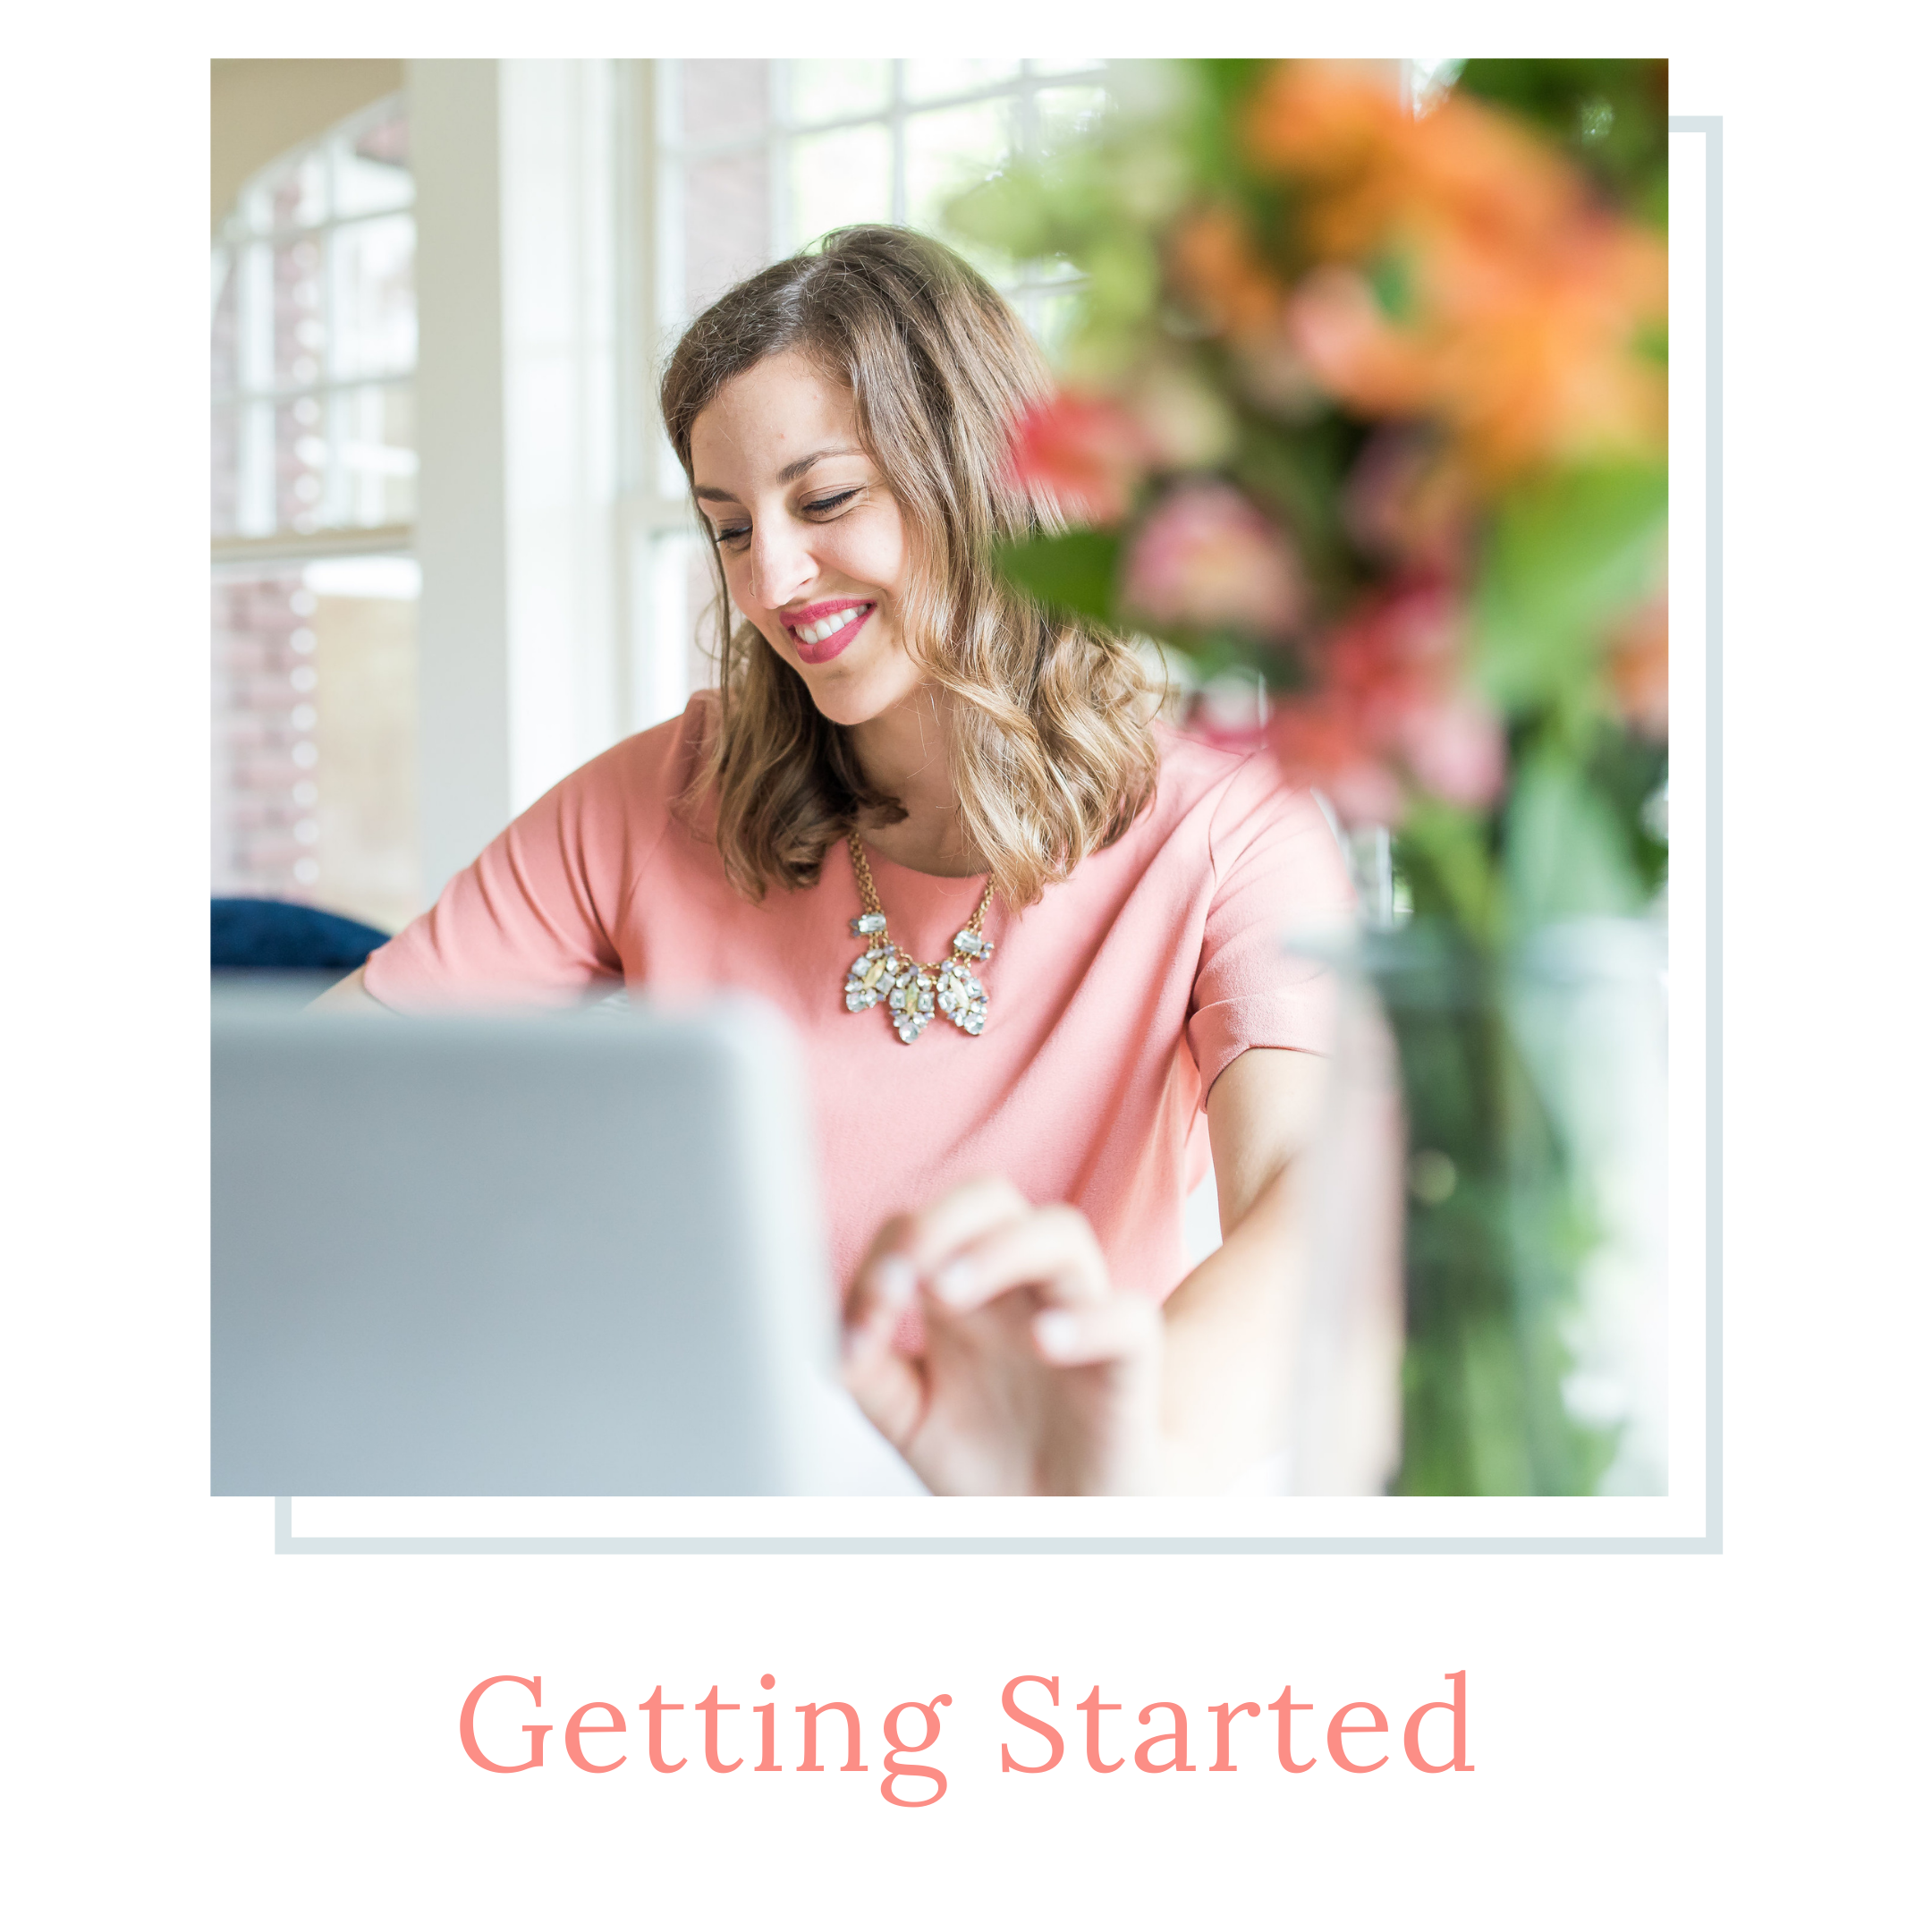 Getting started blog posts